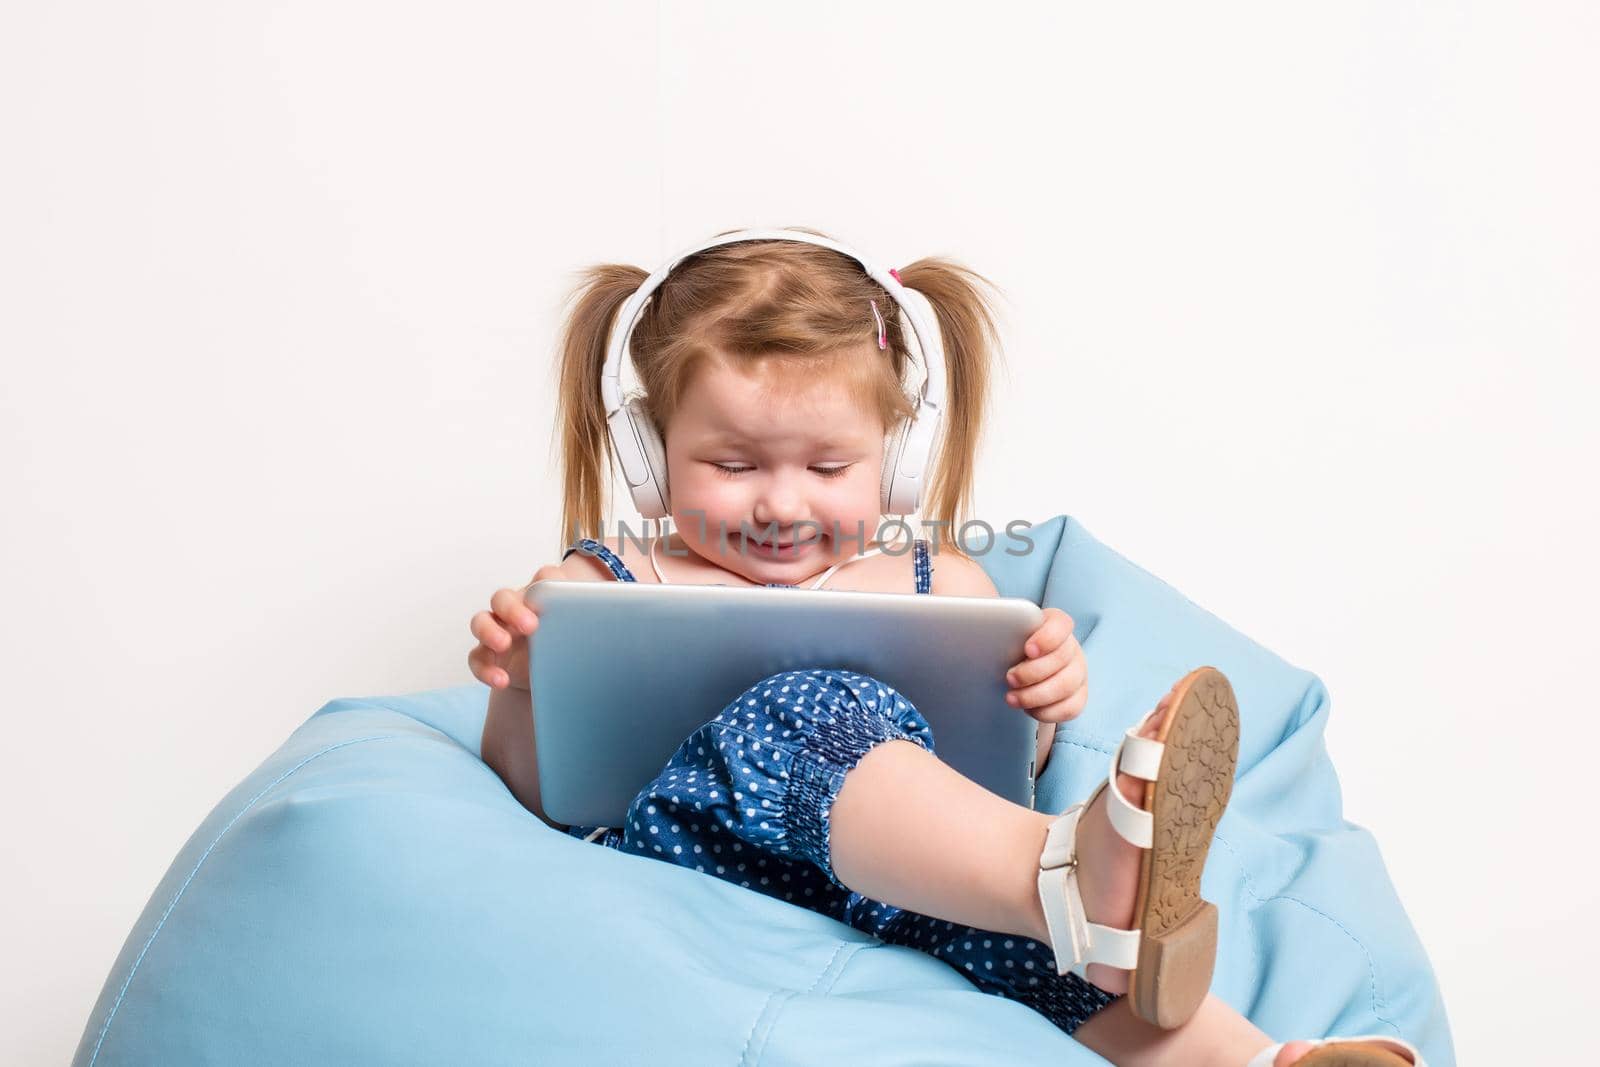 Cute little girl in headphones listening to music using a tablet and smiling while sitting on blue big bag. On white background.